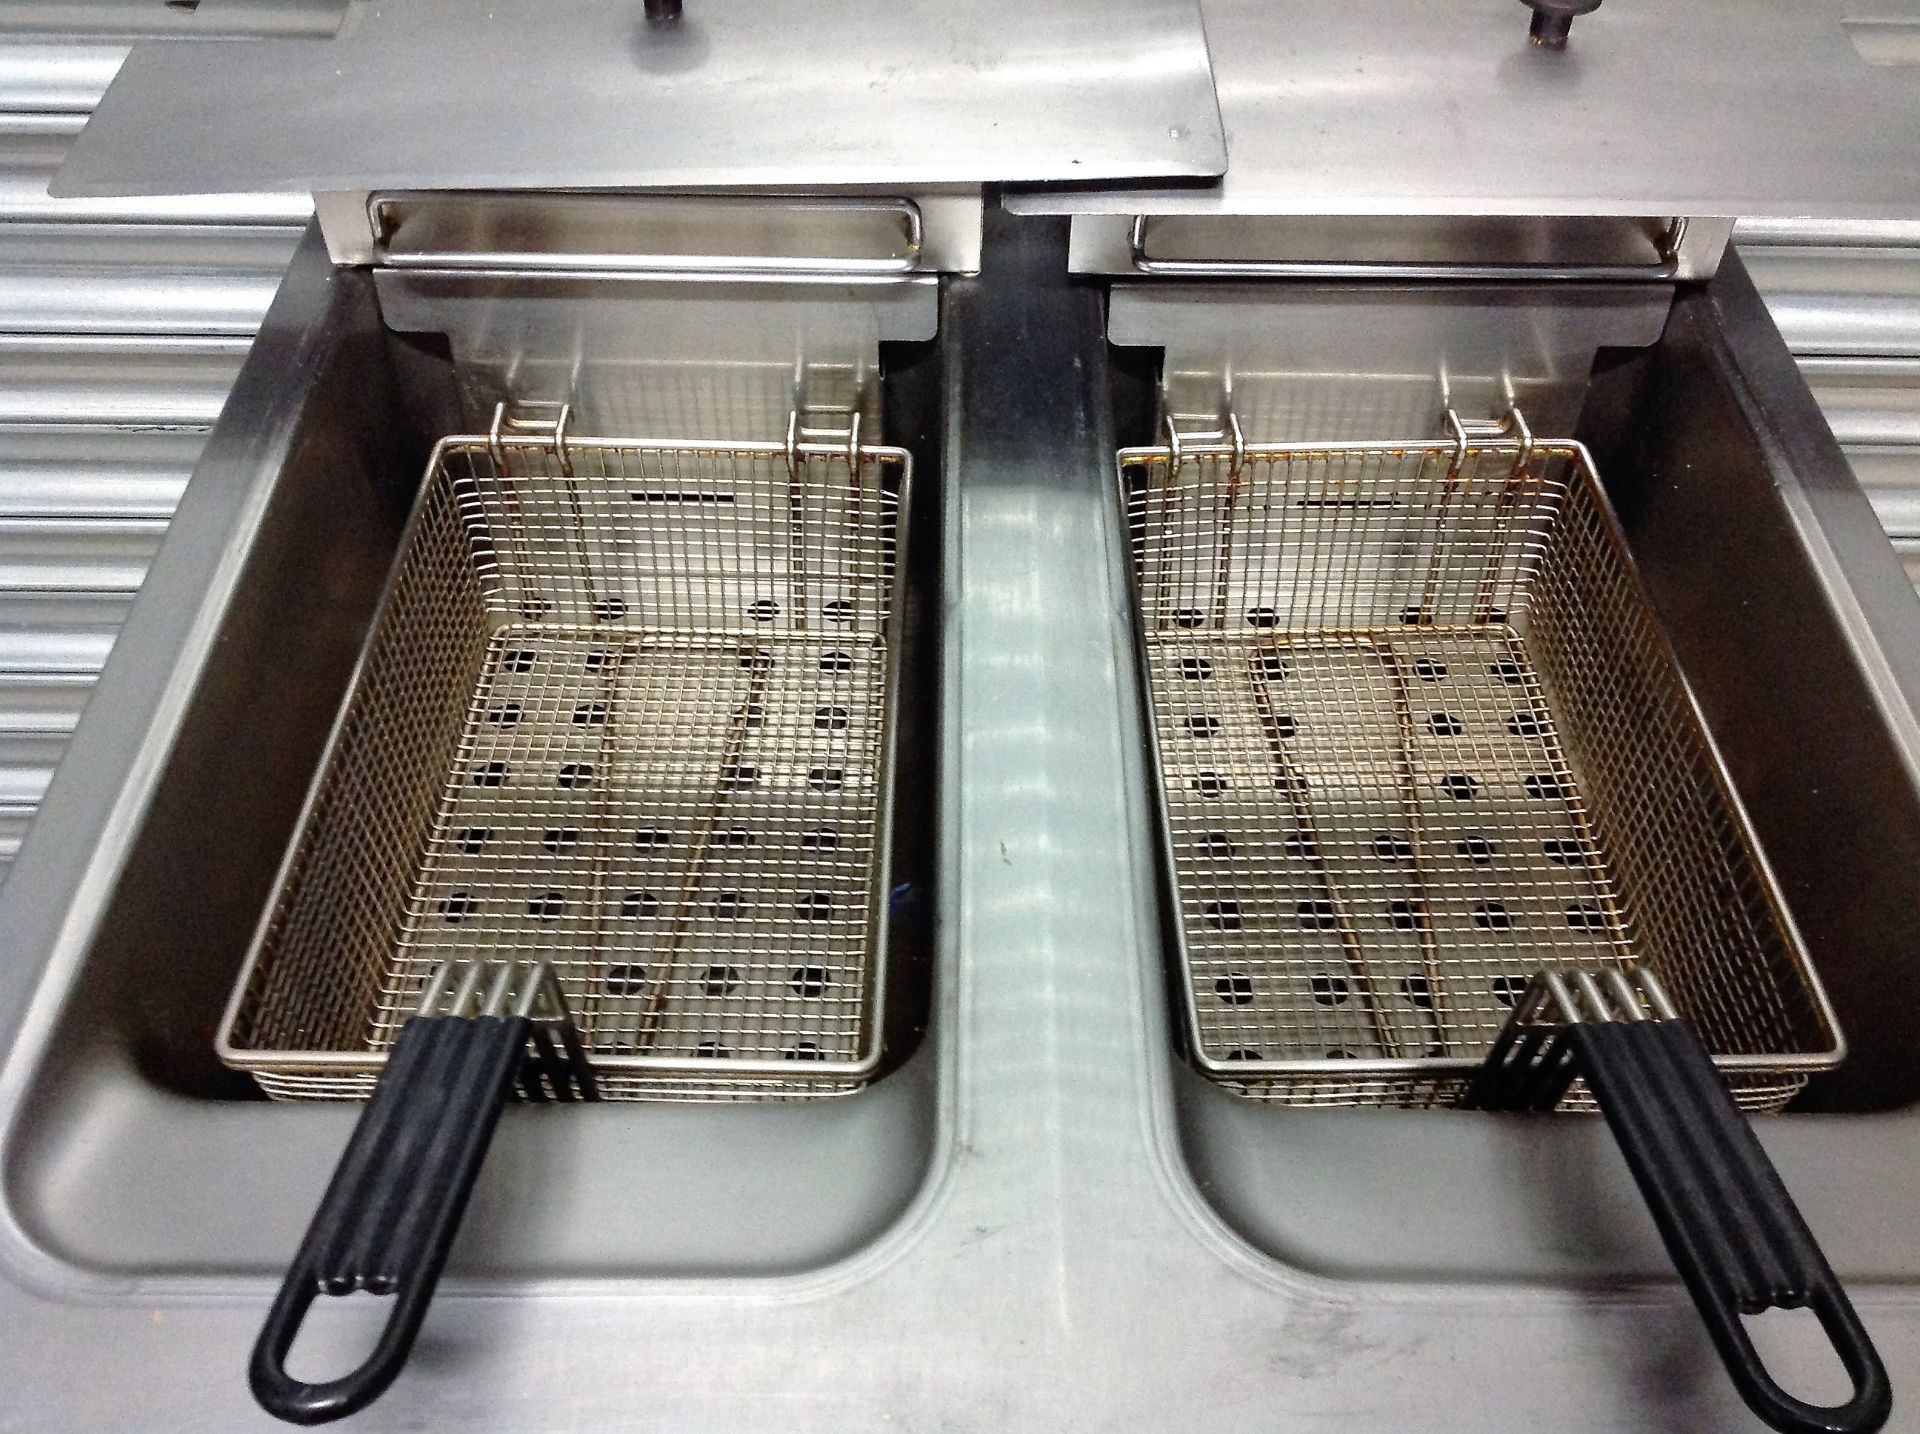 Lincat Stainless Steel Double Deep Fat Fryer With Under Cupboard And Oil Bucket/Nozzle - Image 3 of 6